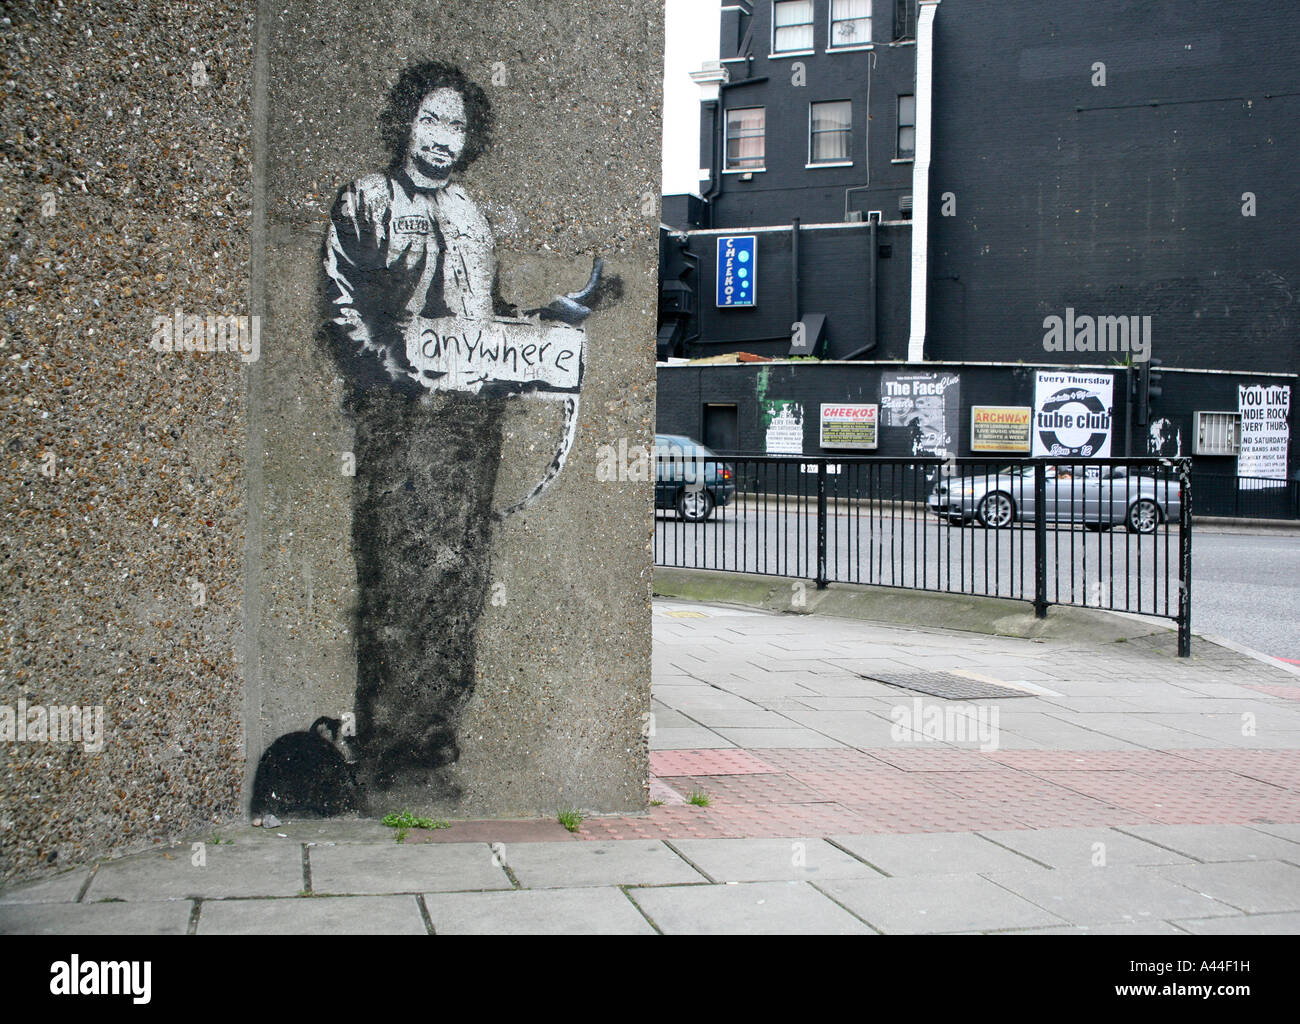 Art Banksy intitulé Anywhere, Archway, Londres, Angleterre Banque D'Images